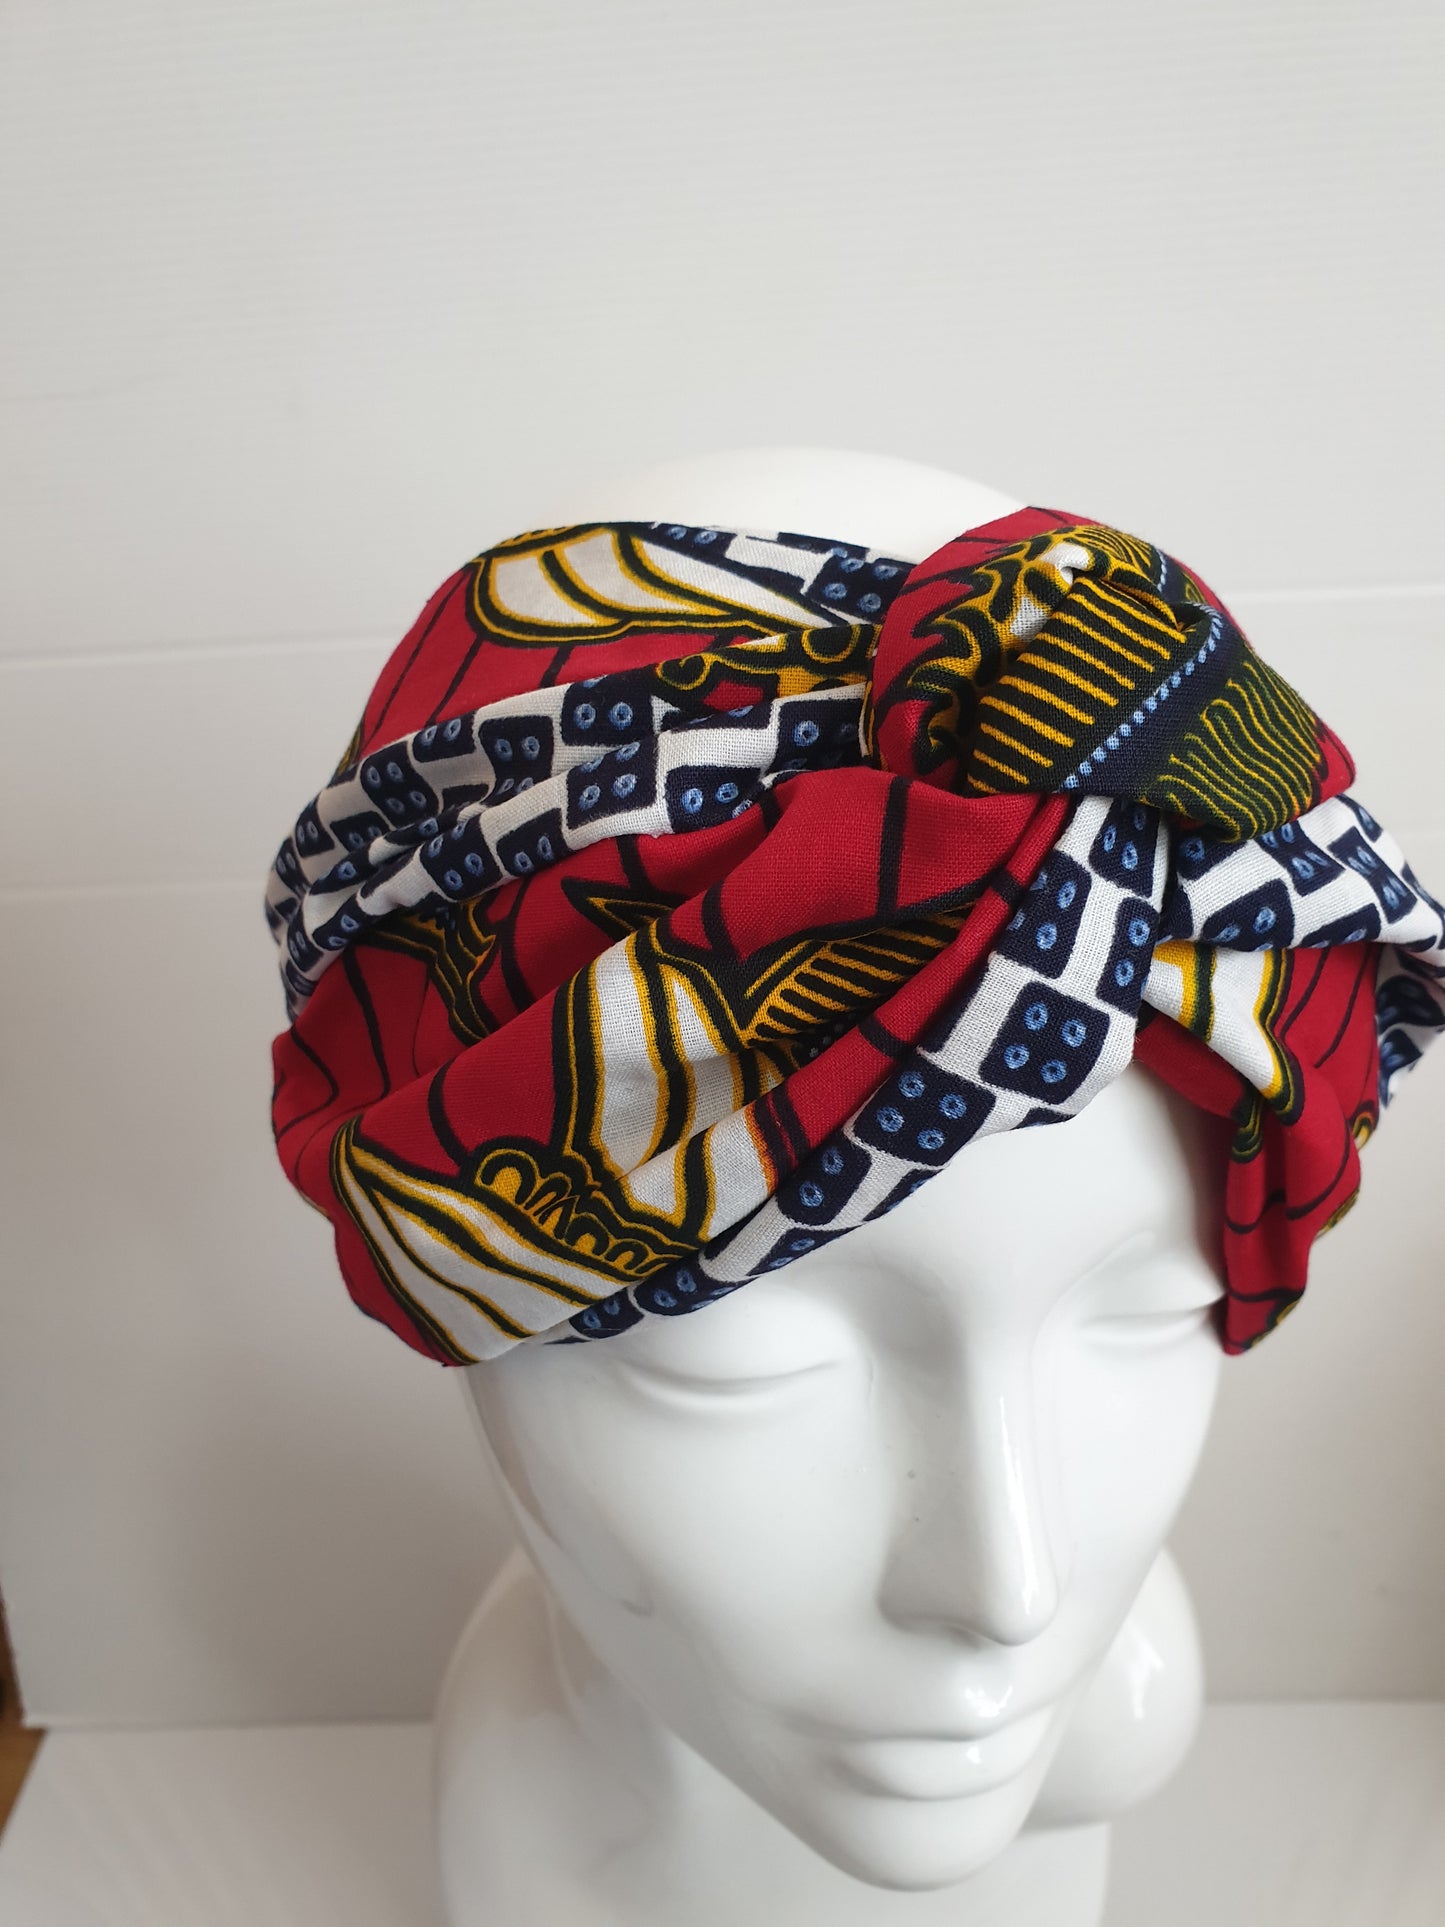 Red mixed Wide African print turban style headband